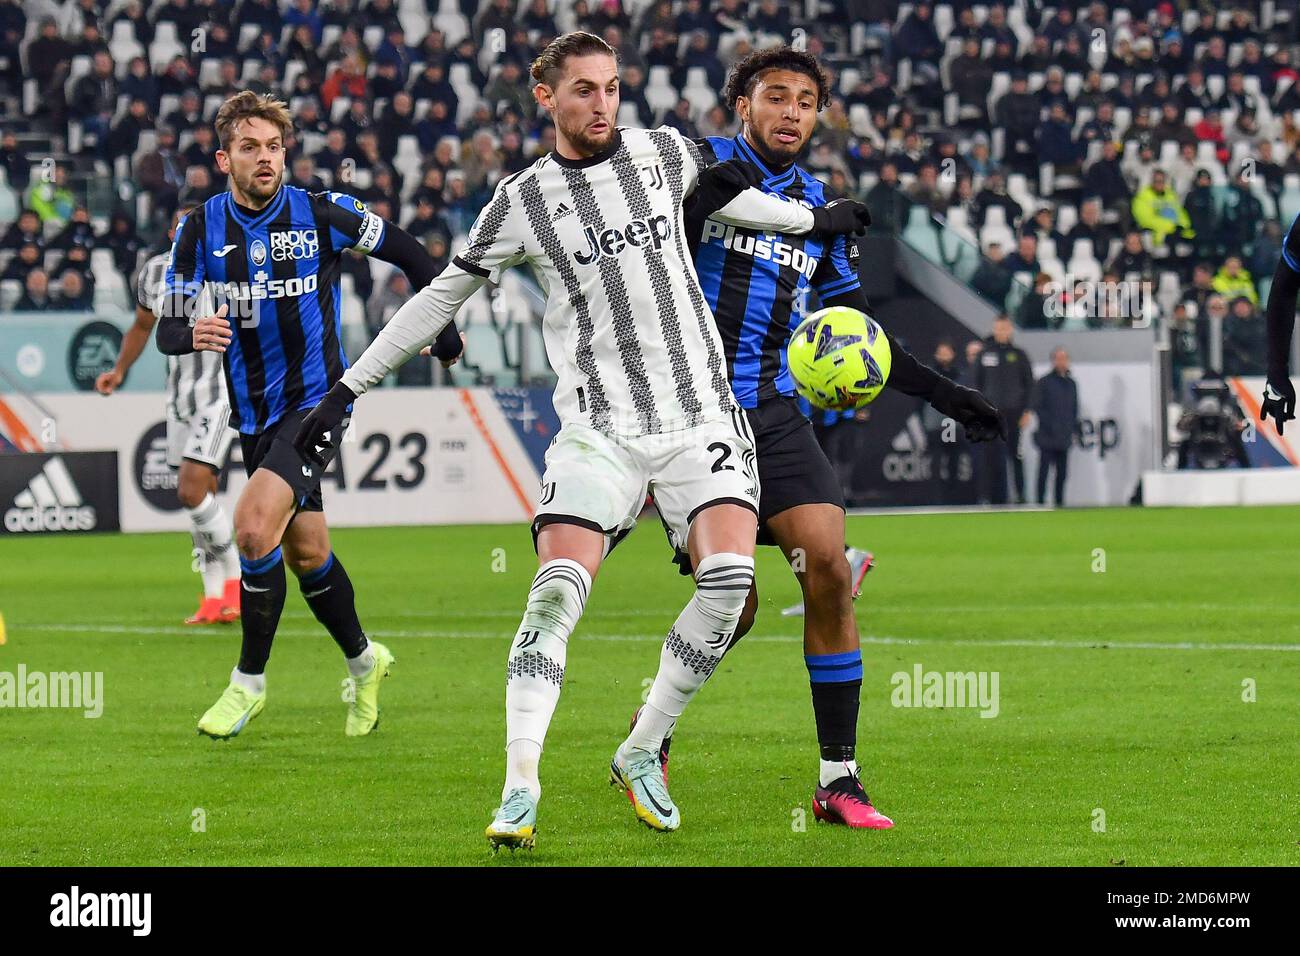 Torino, Italy. 22nd Jan, 2023. Adrien Rabiot of Juventus FC and Ederson Jose dos Santos Lourenco da Silva of Atalanta BC compete for the ball during the Serie A football match between Juventus FC and Atalanta BC at Juventus stadium in Torino (Italy), January 22th, 2022. Photo Giuliano Marchisciano/Insidefoto Credit: Insidefoto di andrea staccioli/Alamy Live News Stock Photo